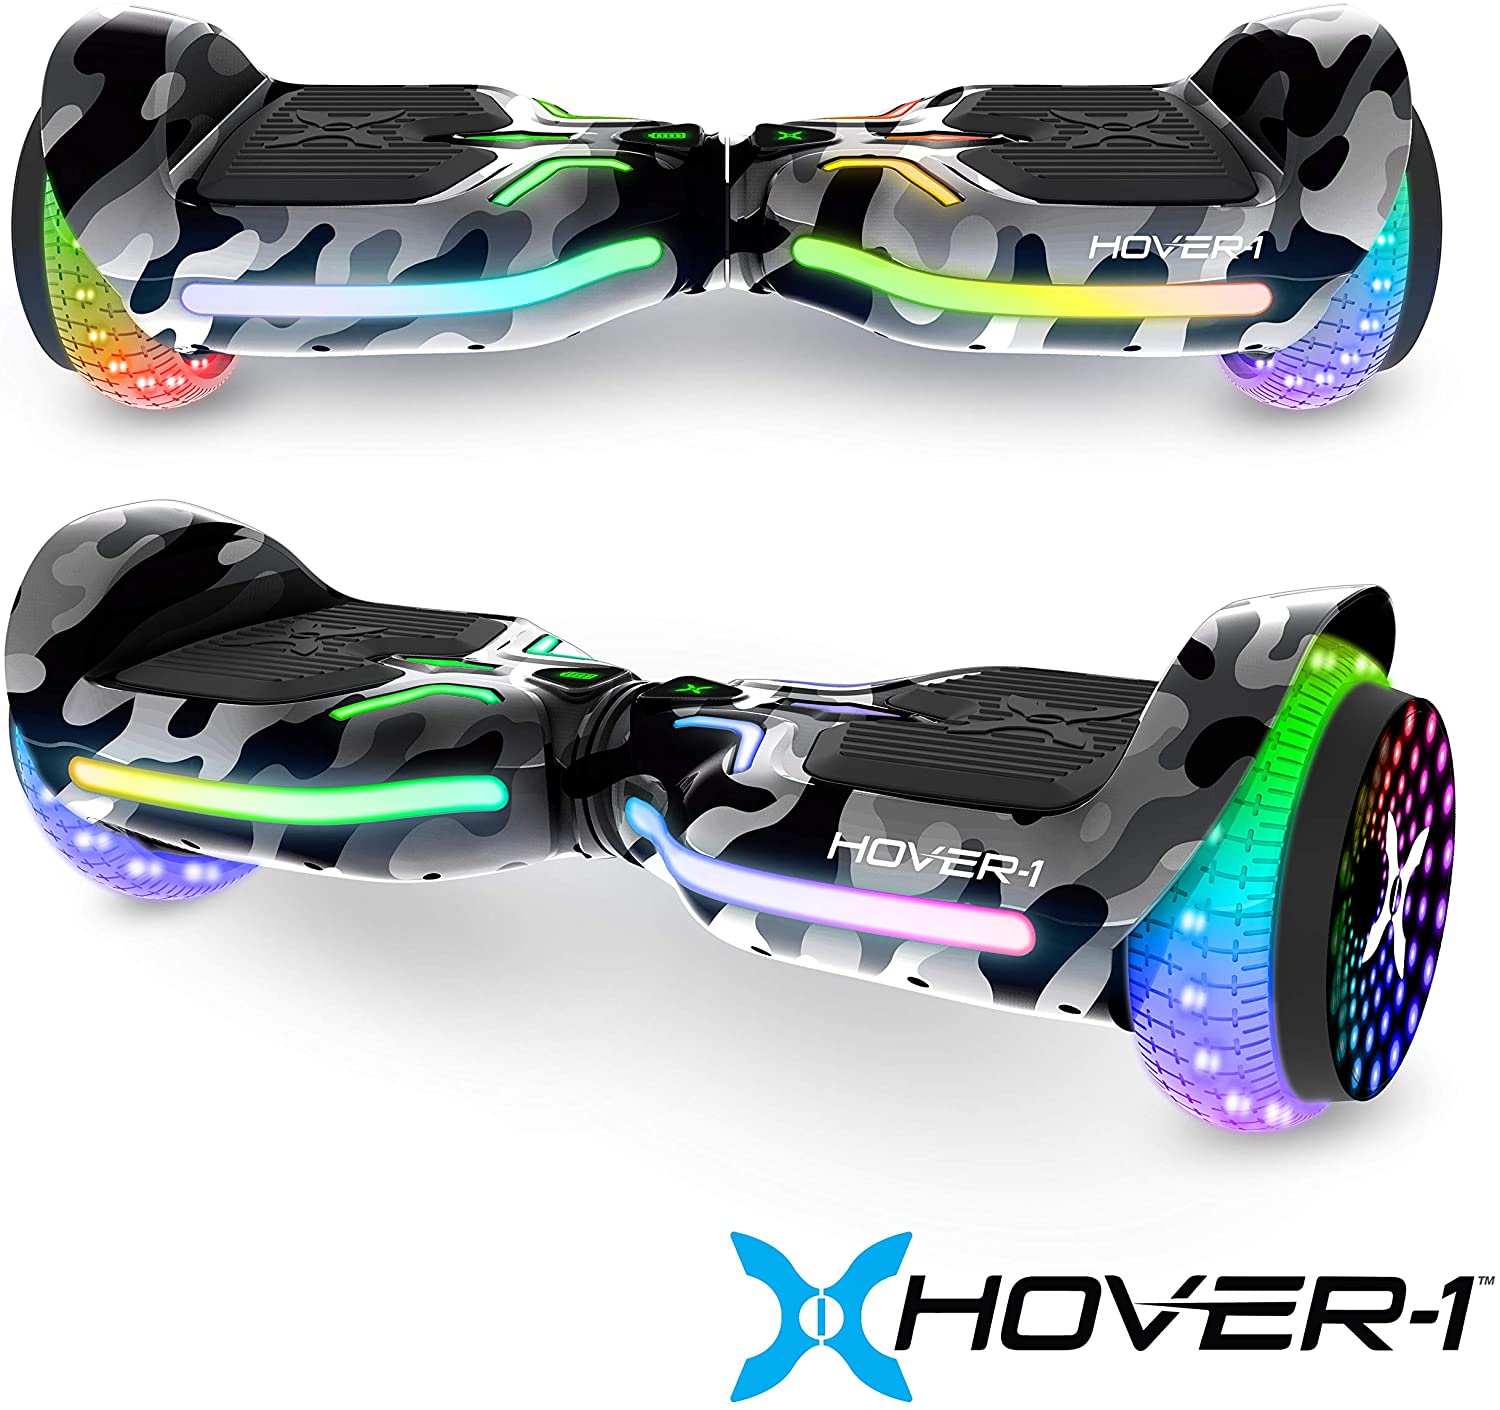 Hover-1 H1-100 Electric Hoverboard Scooter with Infinity LED Wheel Lights - image 2 of 8